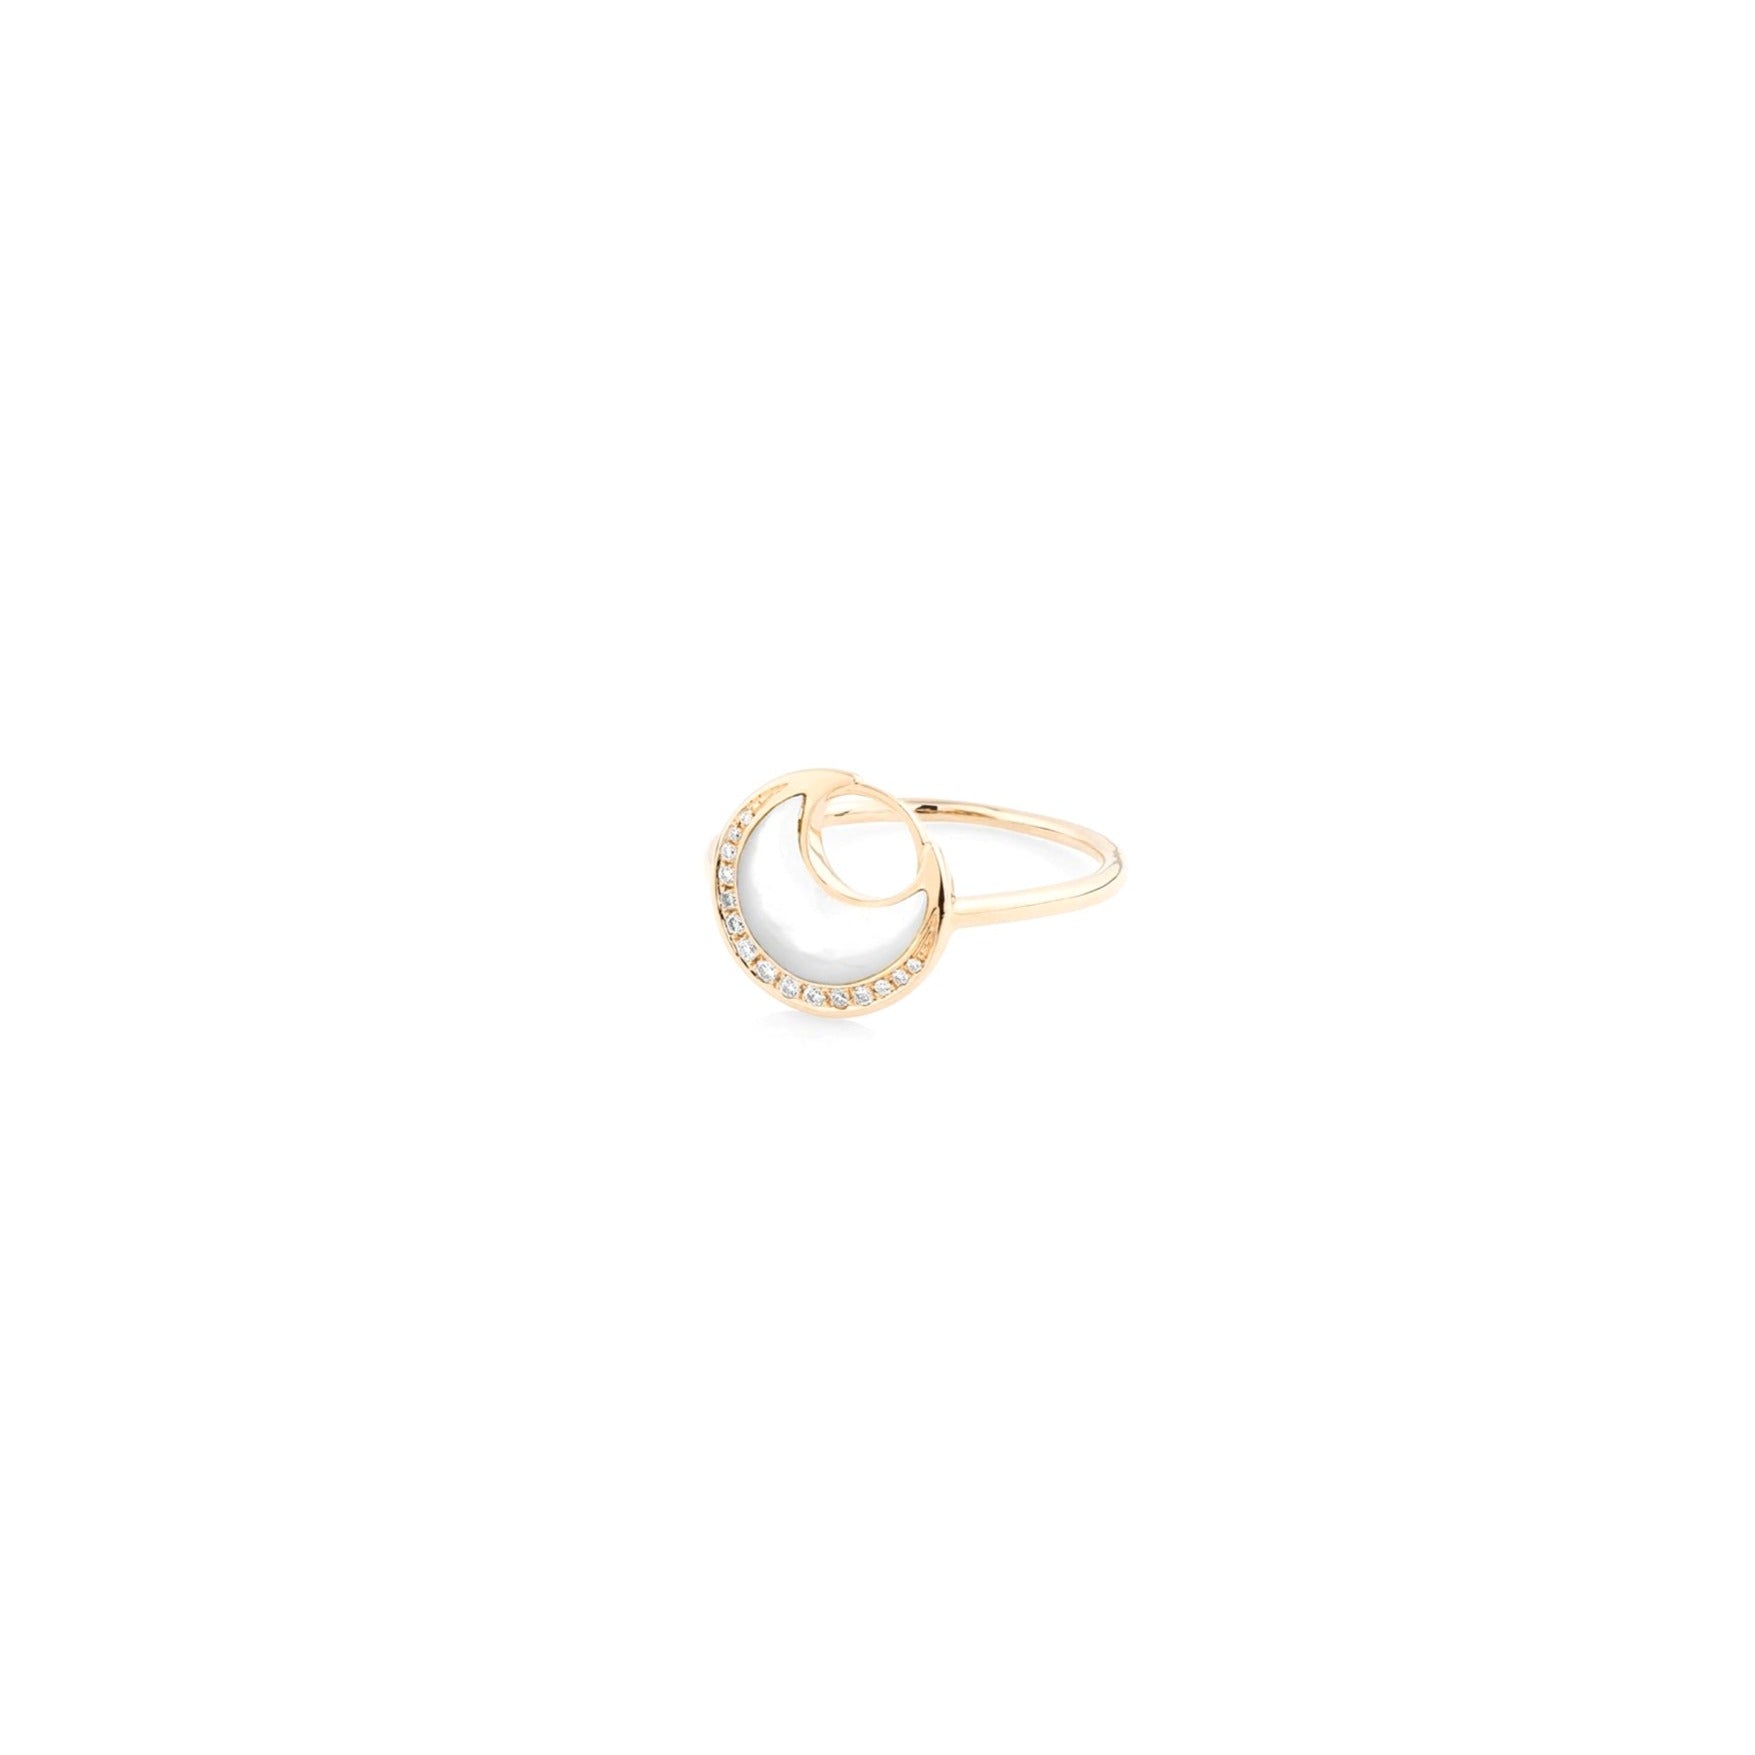 Al Hilal ring in yellow gold with mother of pearl stone and diamonds